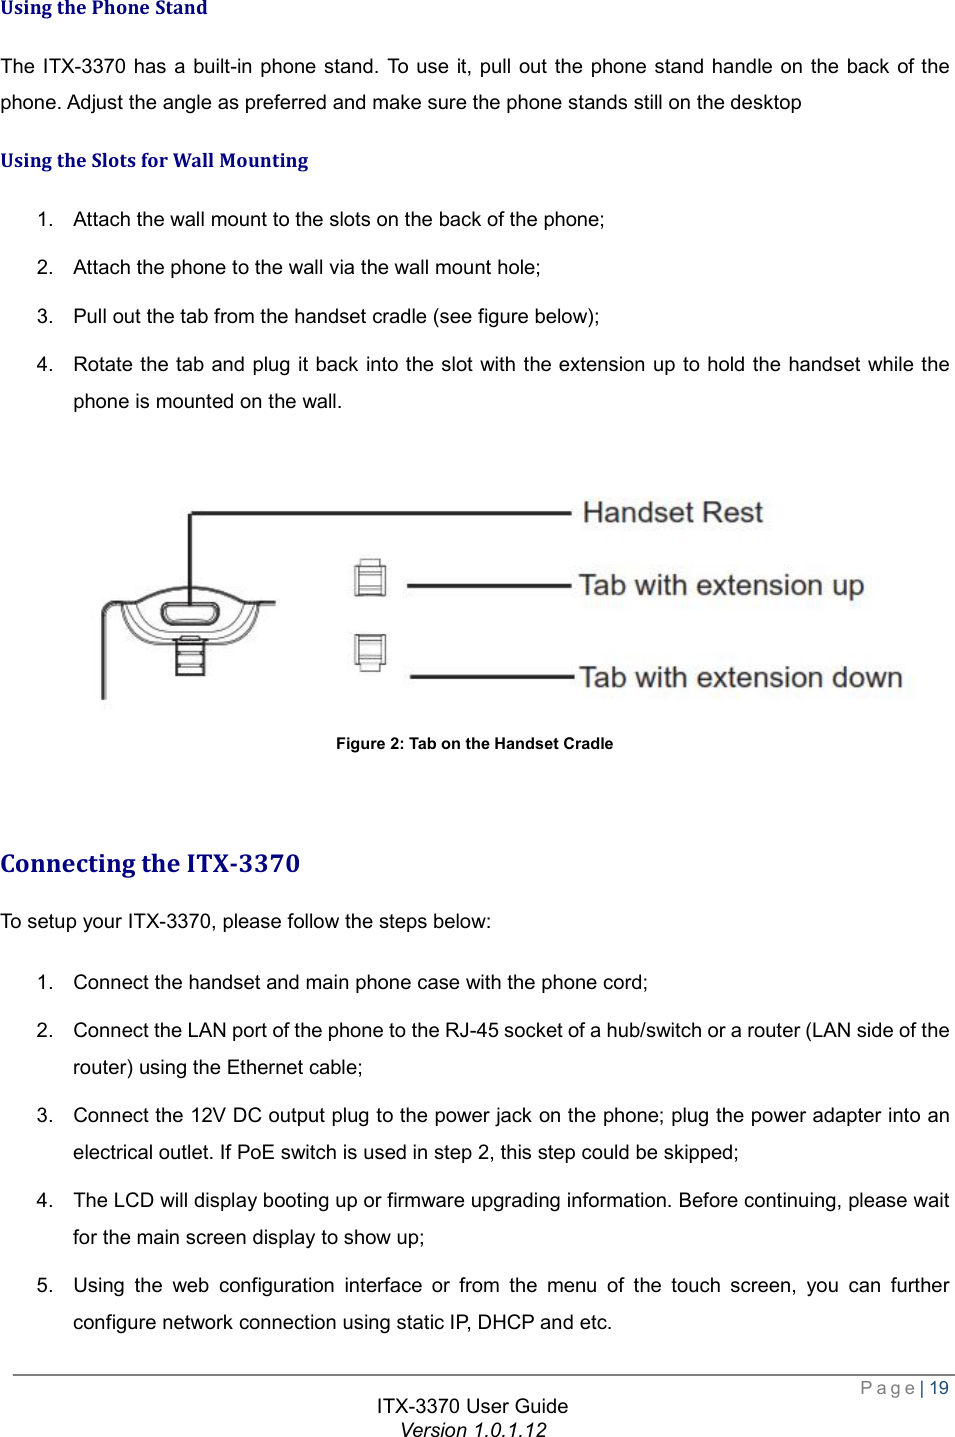  Page| 19  ITX-3370 User Guide Version 1.0.1.12  Using the Phone Stand The ITX-3370 has a built-in phone stand. To use it, pull out the phone stand handle on the back of the phone. Adjust the angle as preferred and make sure the phone stands still on the desktop Using the Slots for Wall Mounting 1. Attach the wall mount to the slots on the back of the phone;  2. Attach the phone to the wall via the wall mount hole;  3. Pull out the tab from the handset cradle (see figure below);  4. Rotate the tab and plug it back into the slot with the extension up to hold the handset while the phone is mounted on the wall.   Figure 2: Tab on the Handset Cradle   Connecting the ITX-3370 To setup your ITX-3370, please follow the steps below: 1. Connect the handset and main phone case with the phone cord;  2. Connect the LAN port of the phone to the RJ-45 socket of a hub/switch or a router (LAN side of the router) using the Ethernet cable;  3. Connect the 12V DC output plug to the power jack on the phone; plug the power adapter into an electrical outlet. If PoE switch is used in step 2, this step could be skipped;  4. The LCD will display booting up or firmware upgrading information. Before continuing, please wait for the main screen display to show up;  5. Using the web configuration interface or from the menu of the touch screen, you can further configure network connection using static IP, DHCP and etc. 